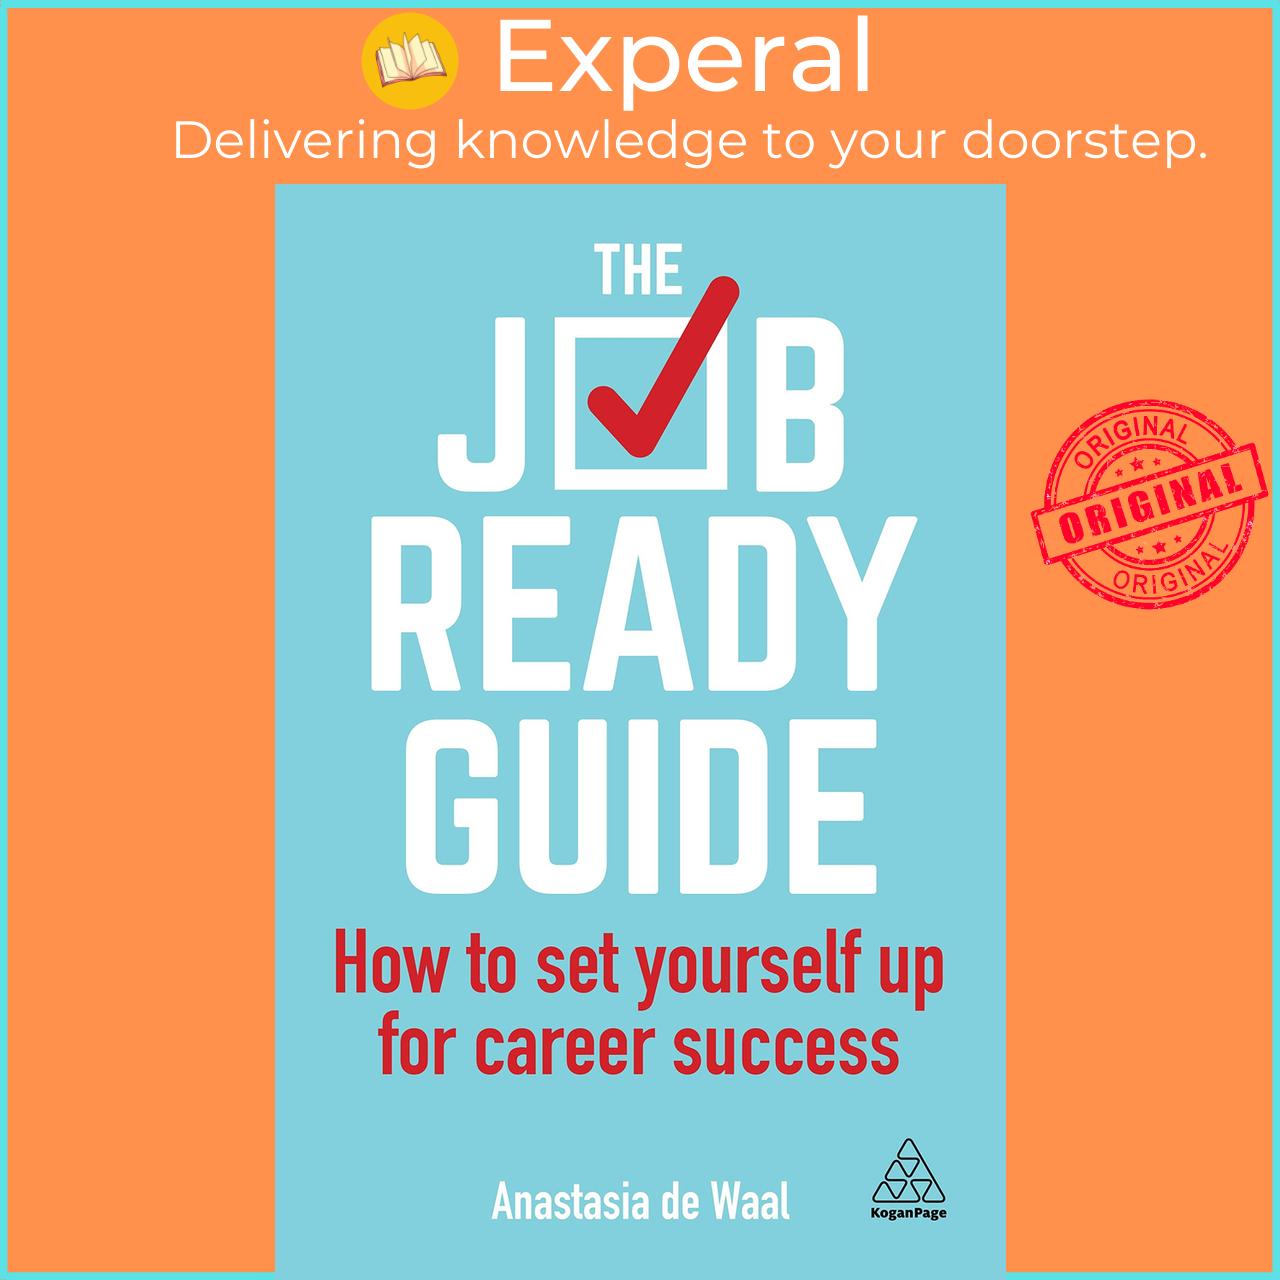 Sách - The Job-Ready Guide : Employability Skills and Strategies for Career by Anastasia De Waal (UK edition, paperback)